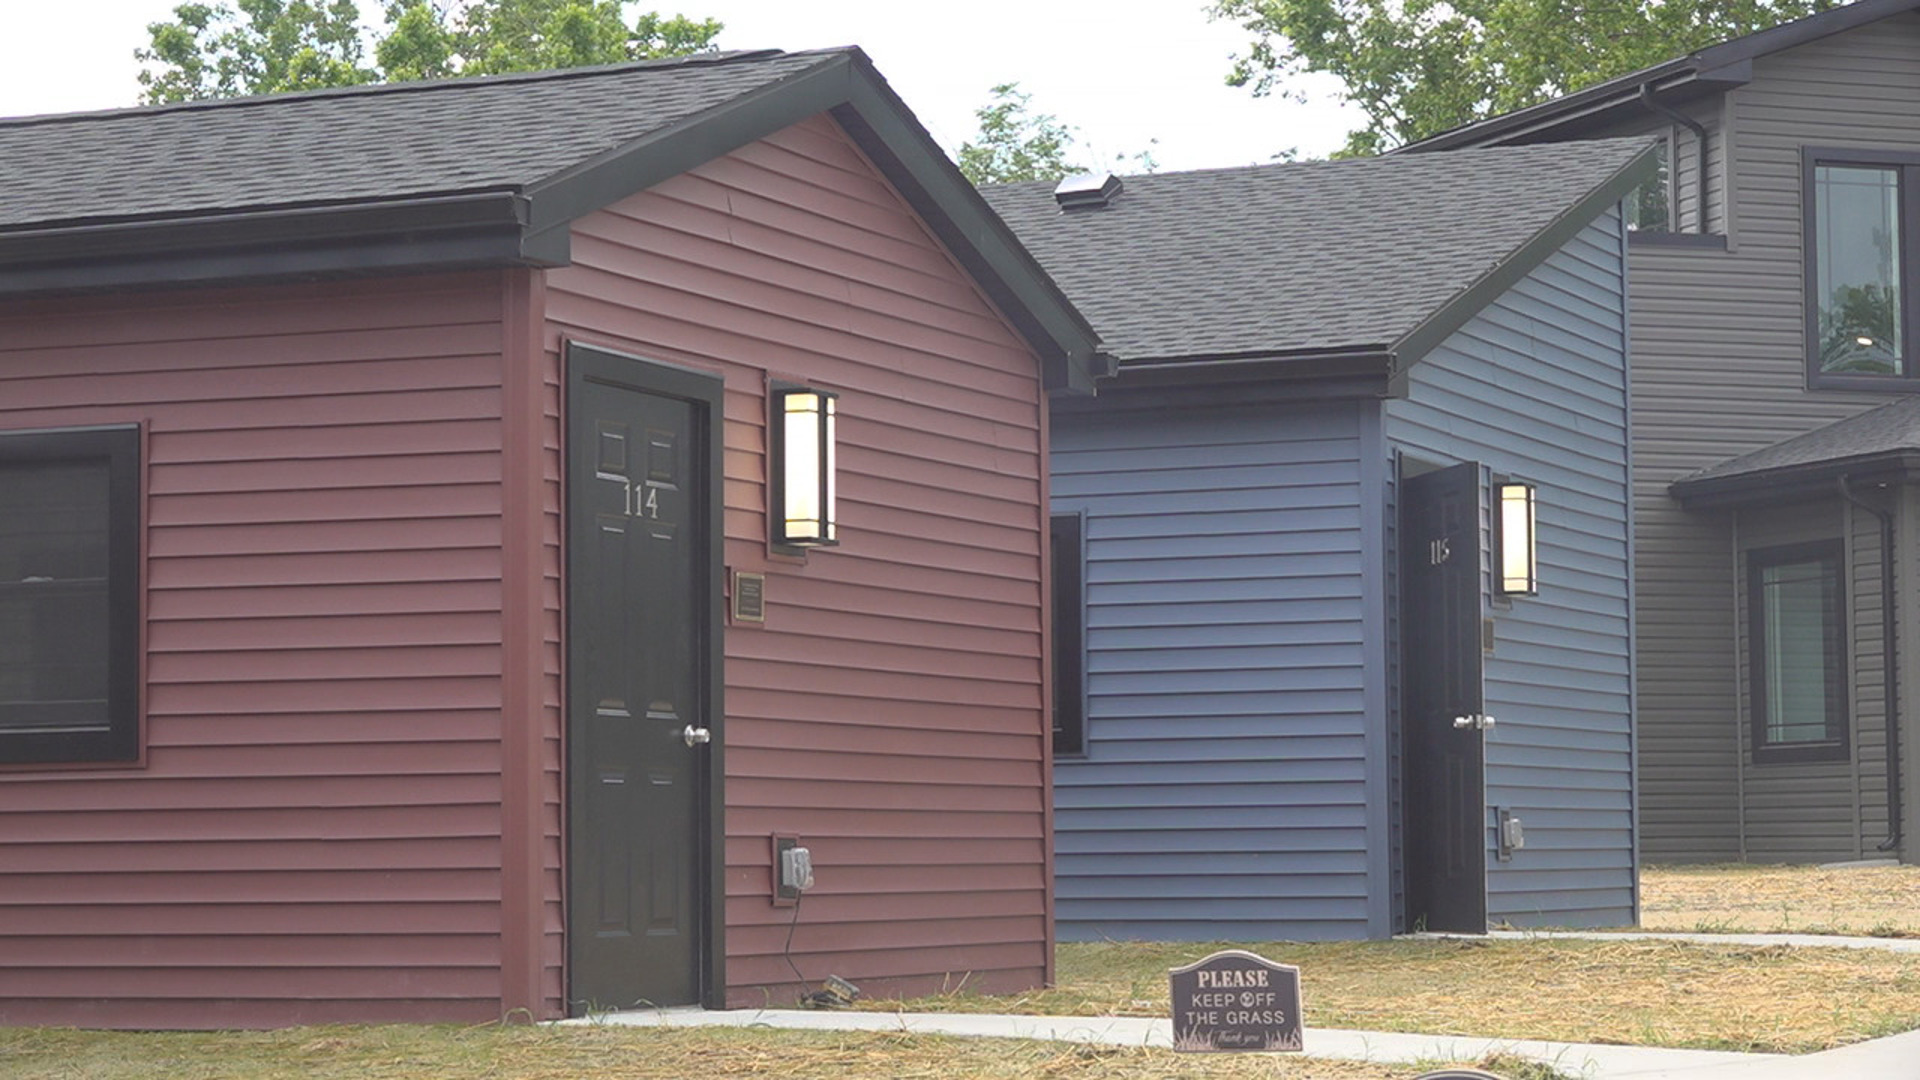 Veteran's Grove will feature 15 fully-furnished tiny homes, which will provide temporary housing for homeless veterans.